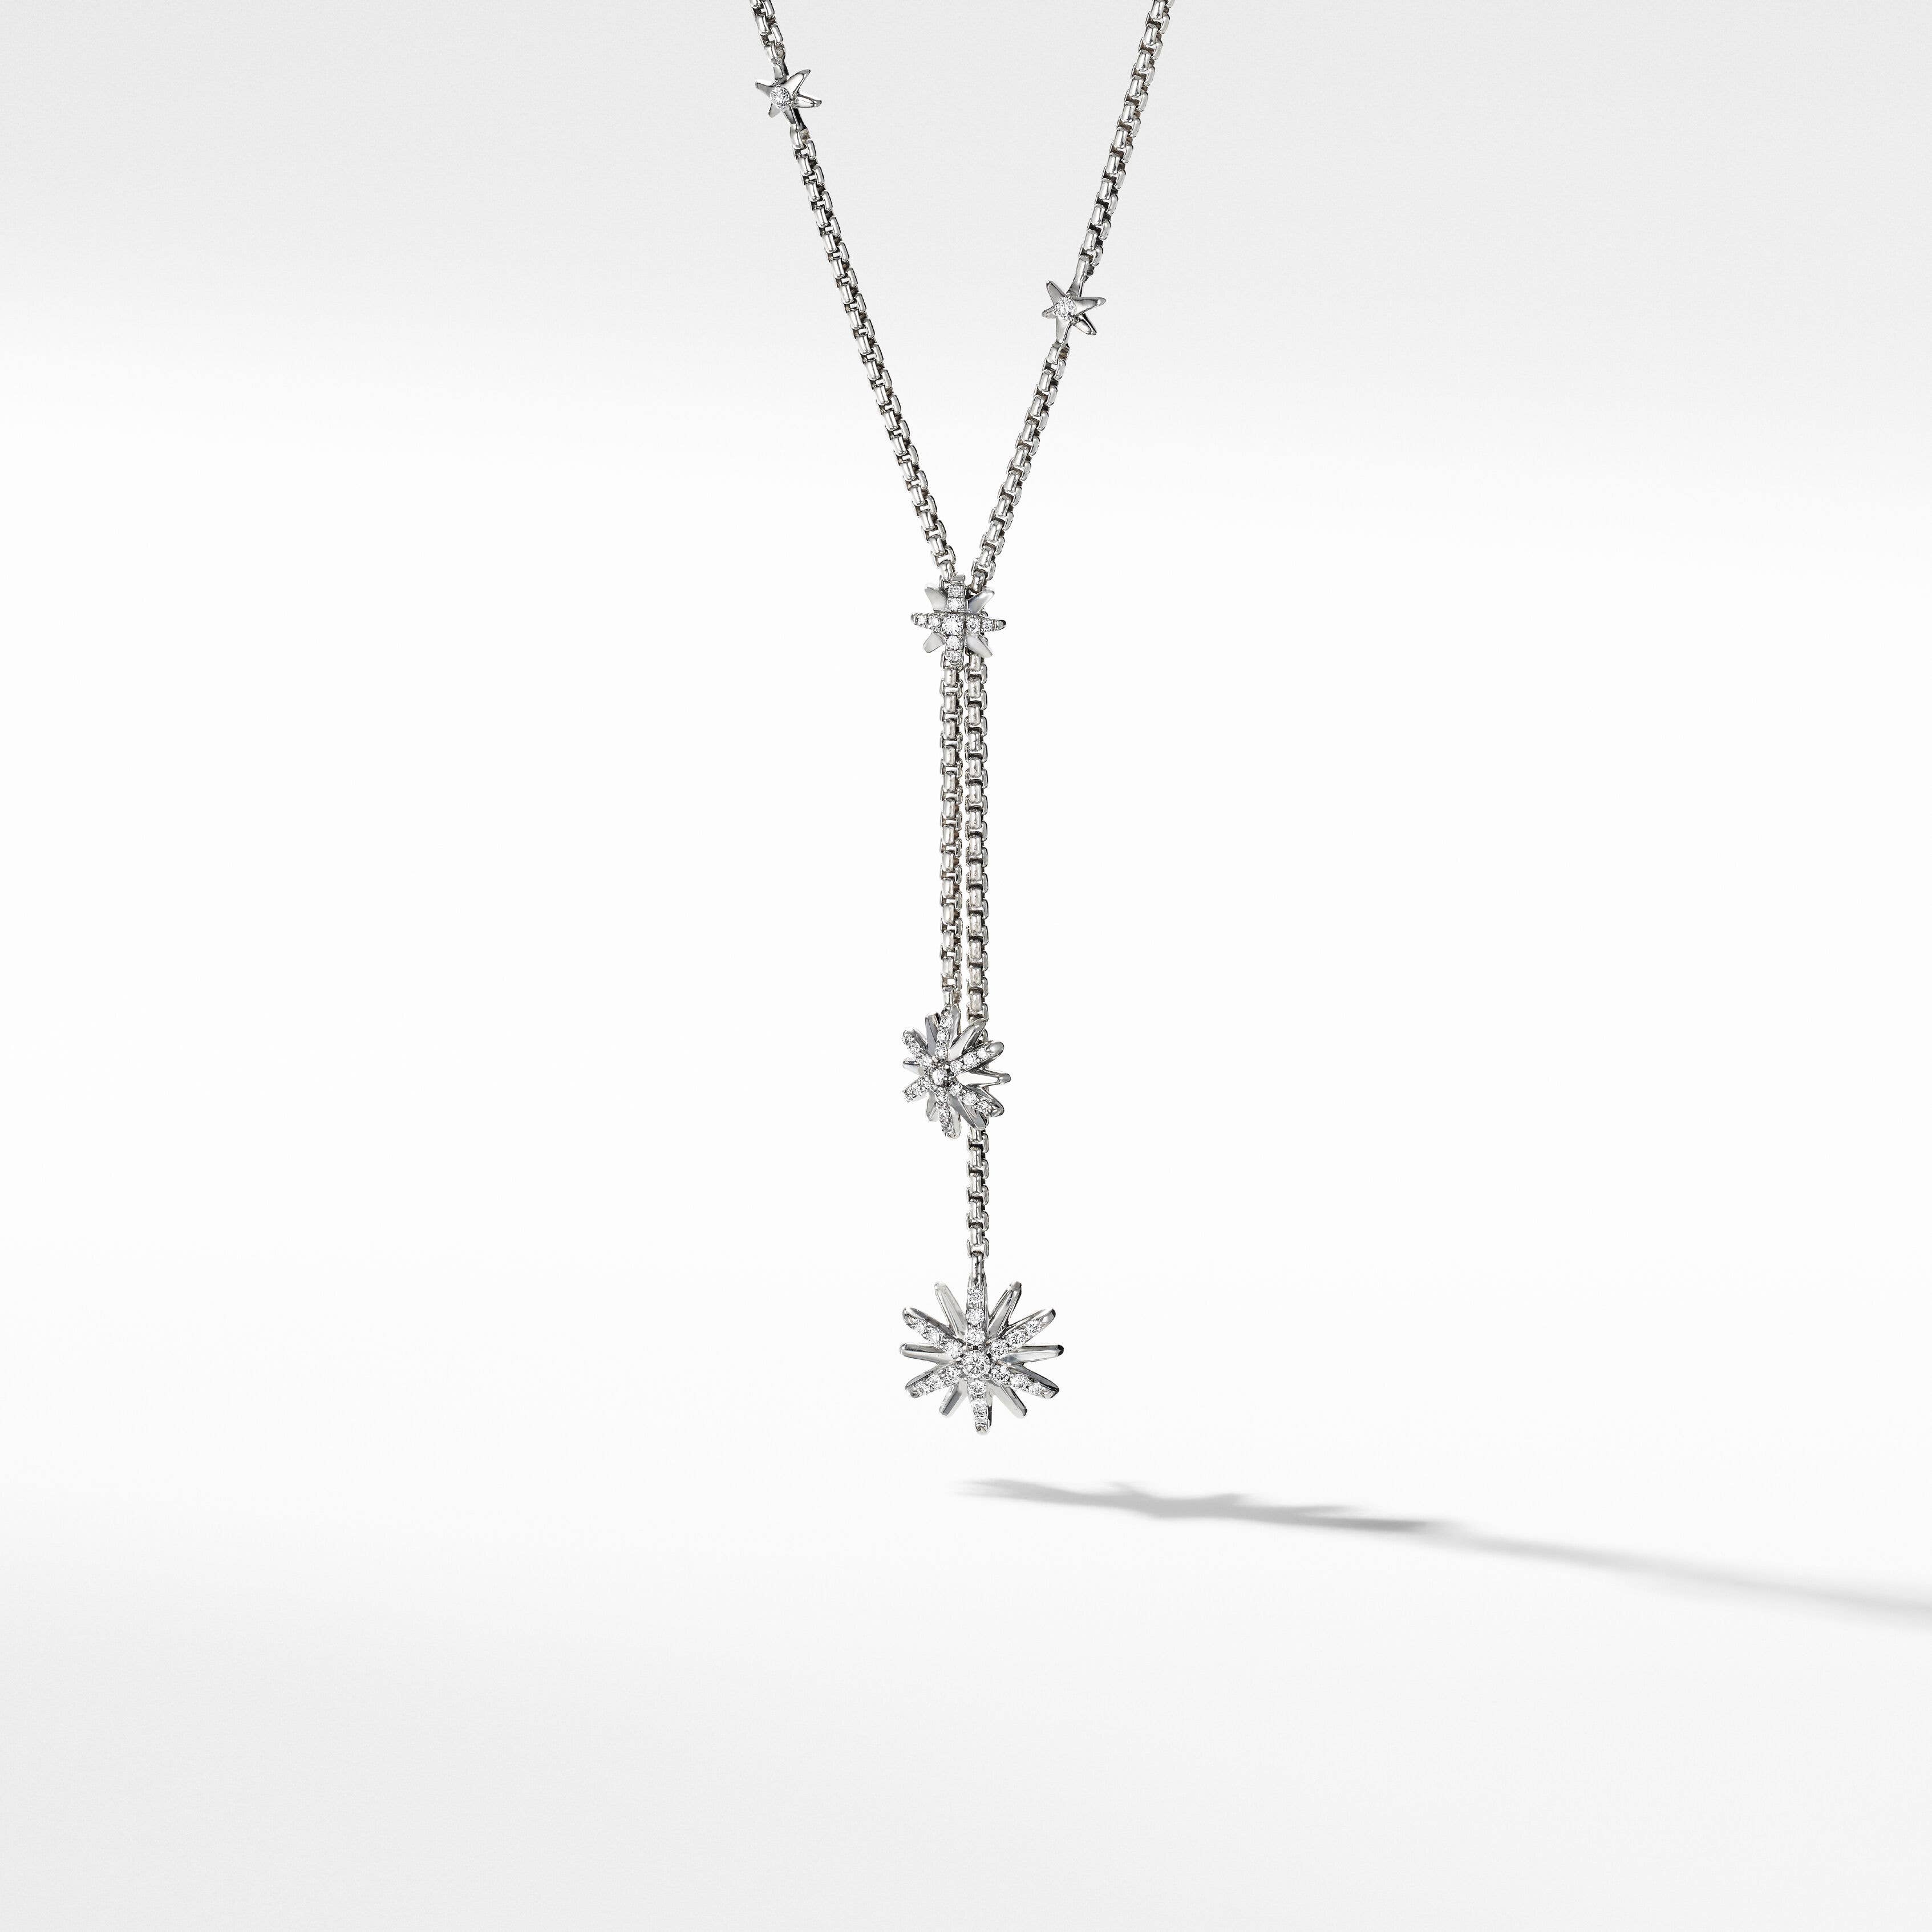 Starburst Y Necklace in Sterling Silver with Pavé Diamonds